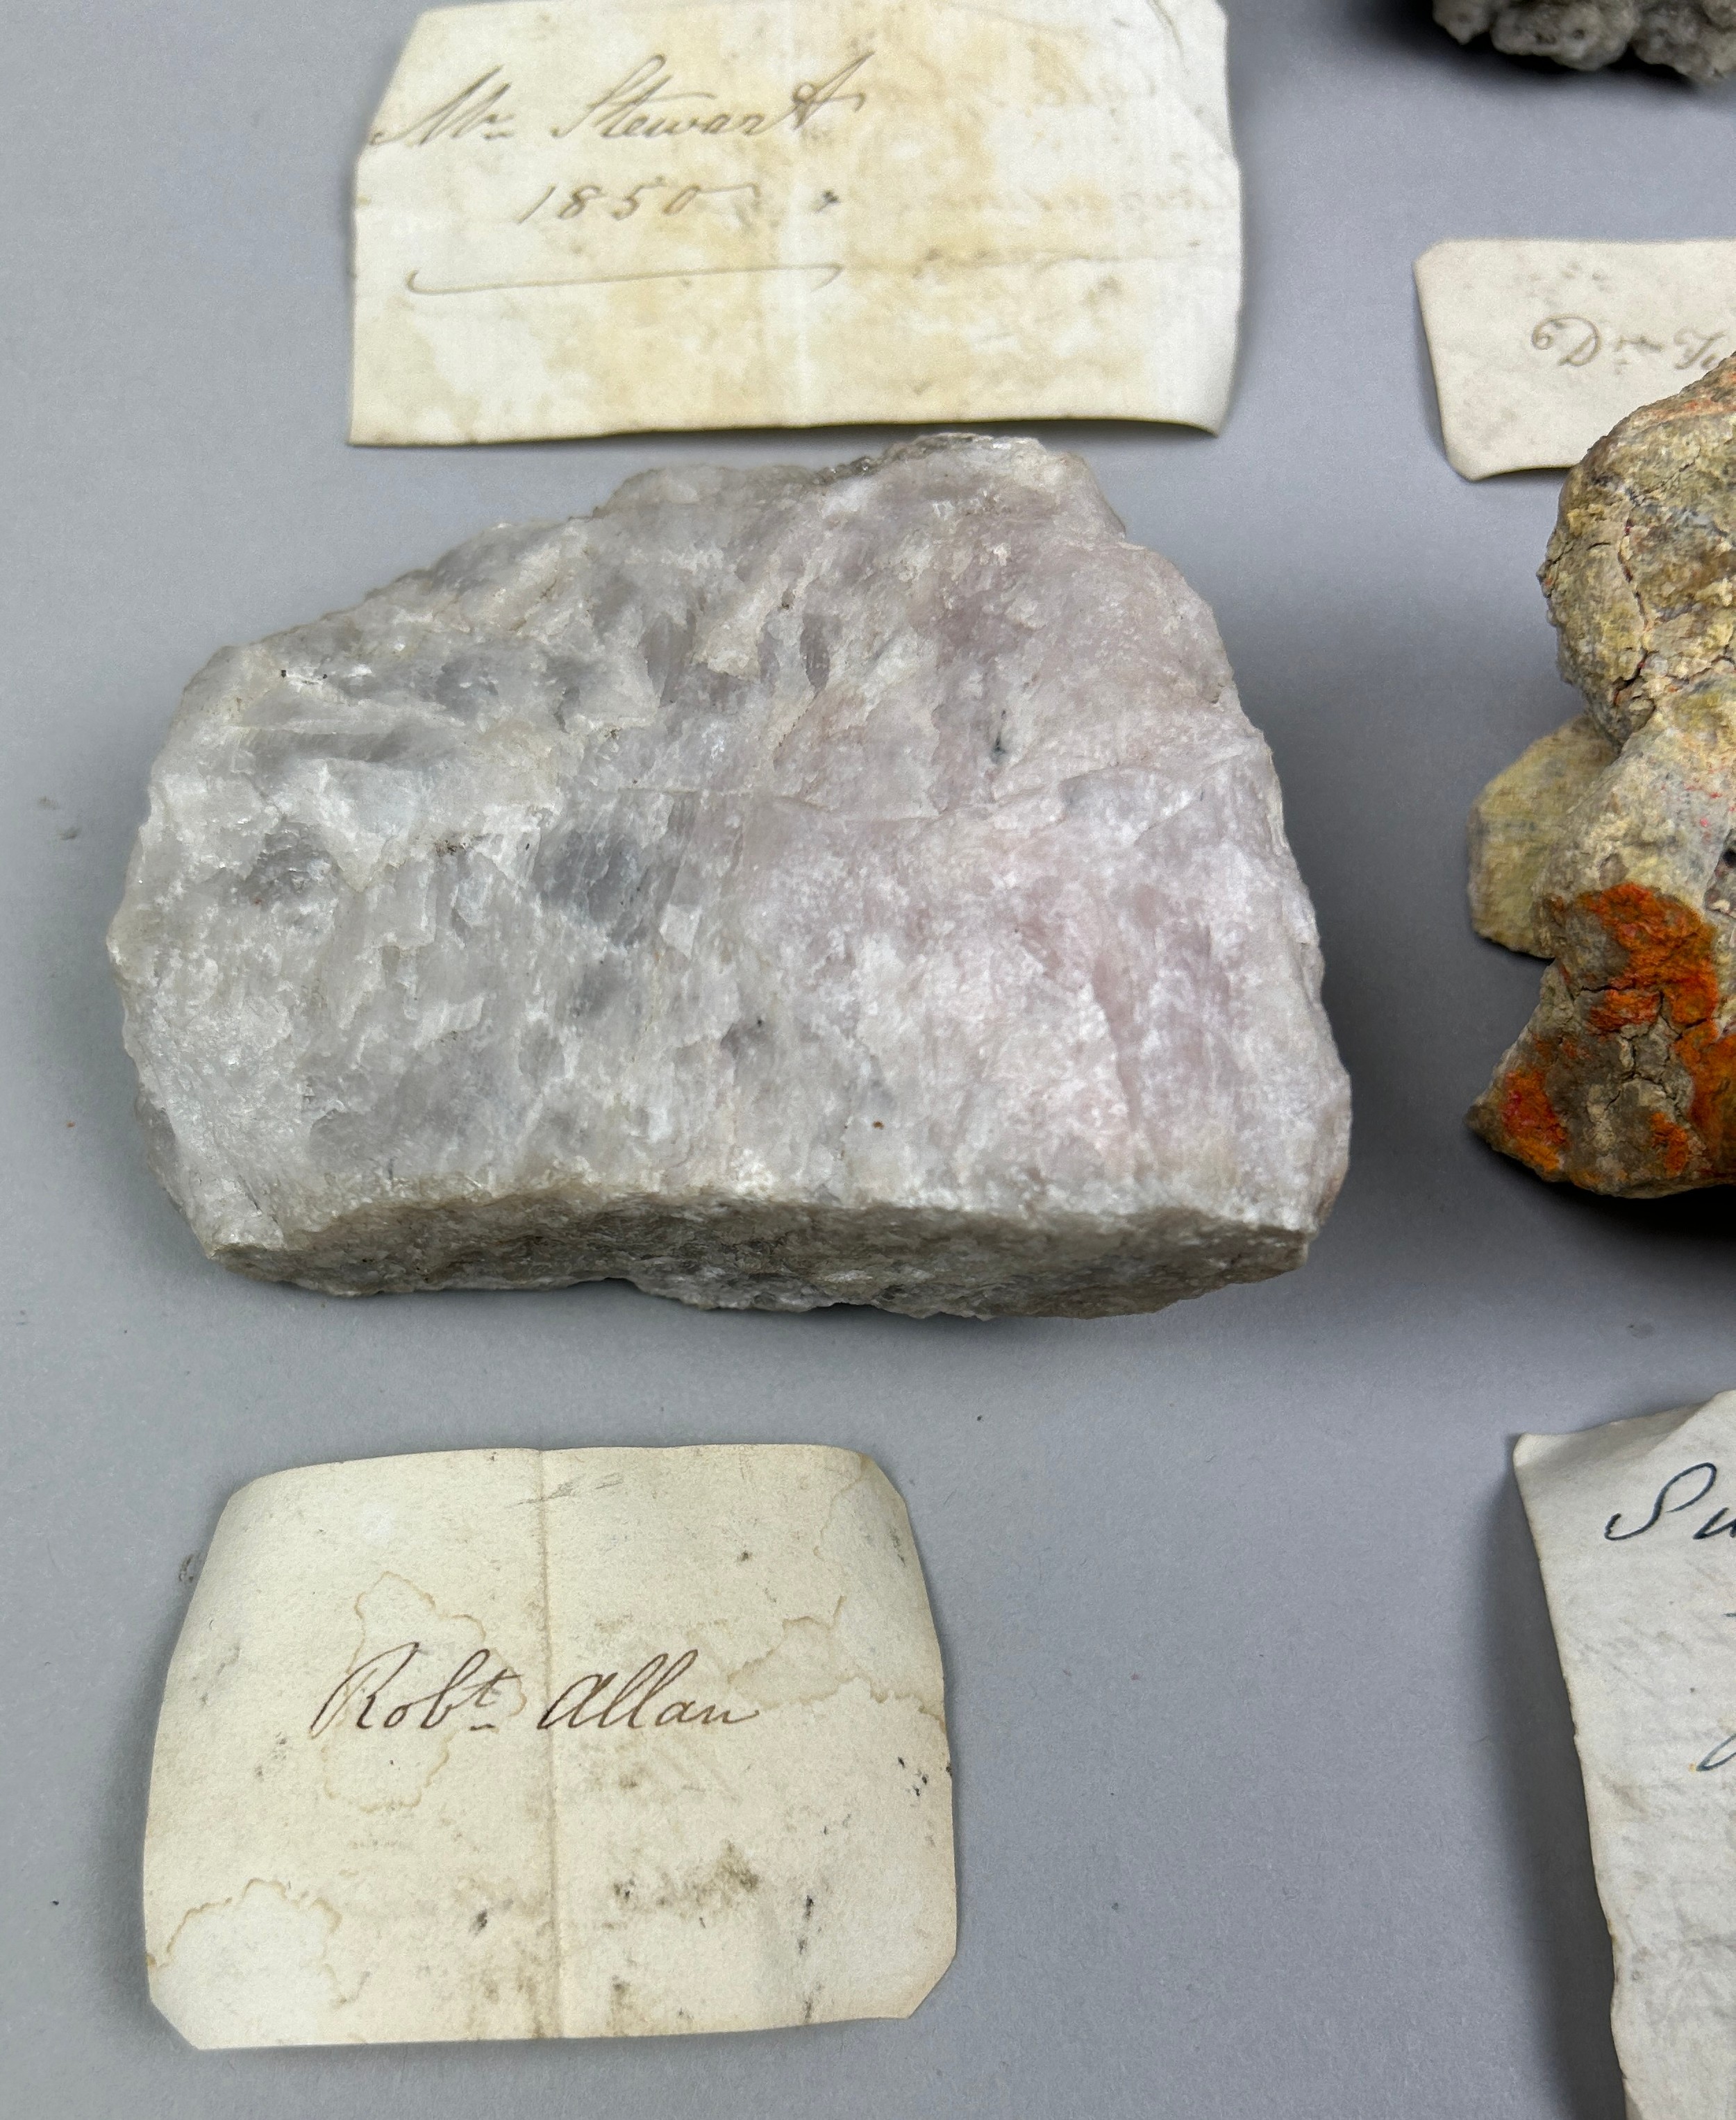 A RARE CABINET COLLECTION OF MINERALS CIRCA 1810-1860, including labels for some very important - Image 13 of 30